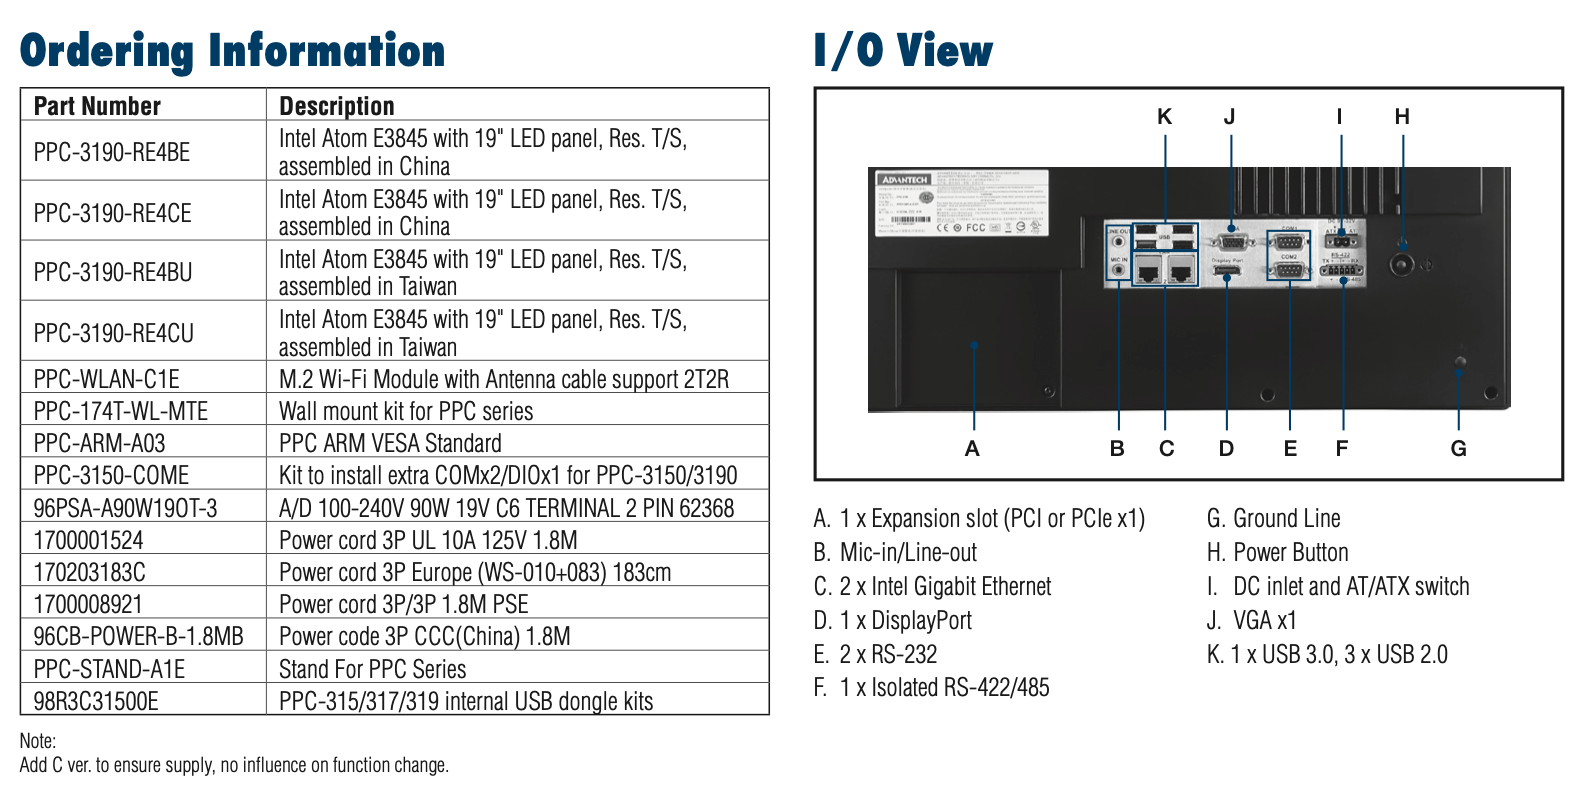 PPC-3190 ordering Information I/O View